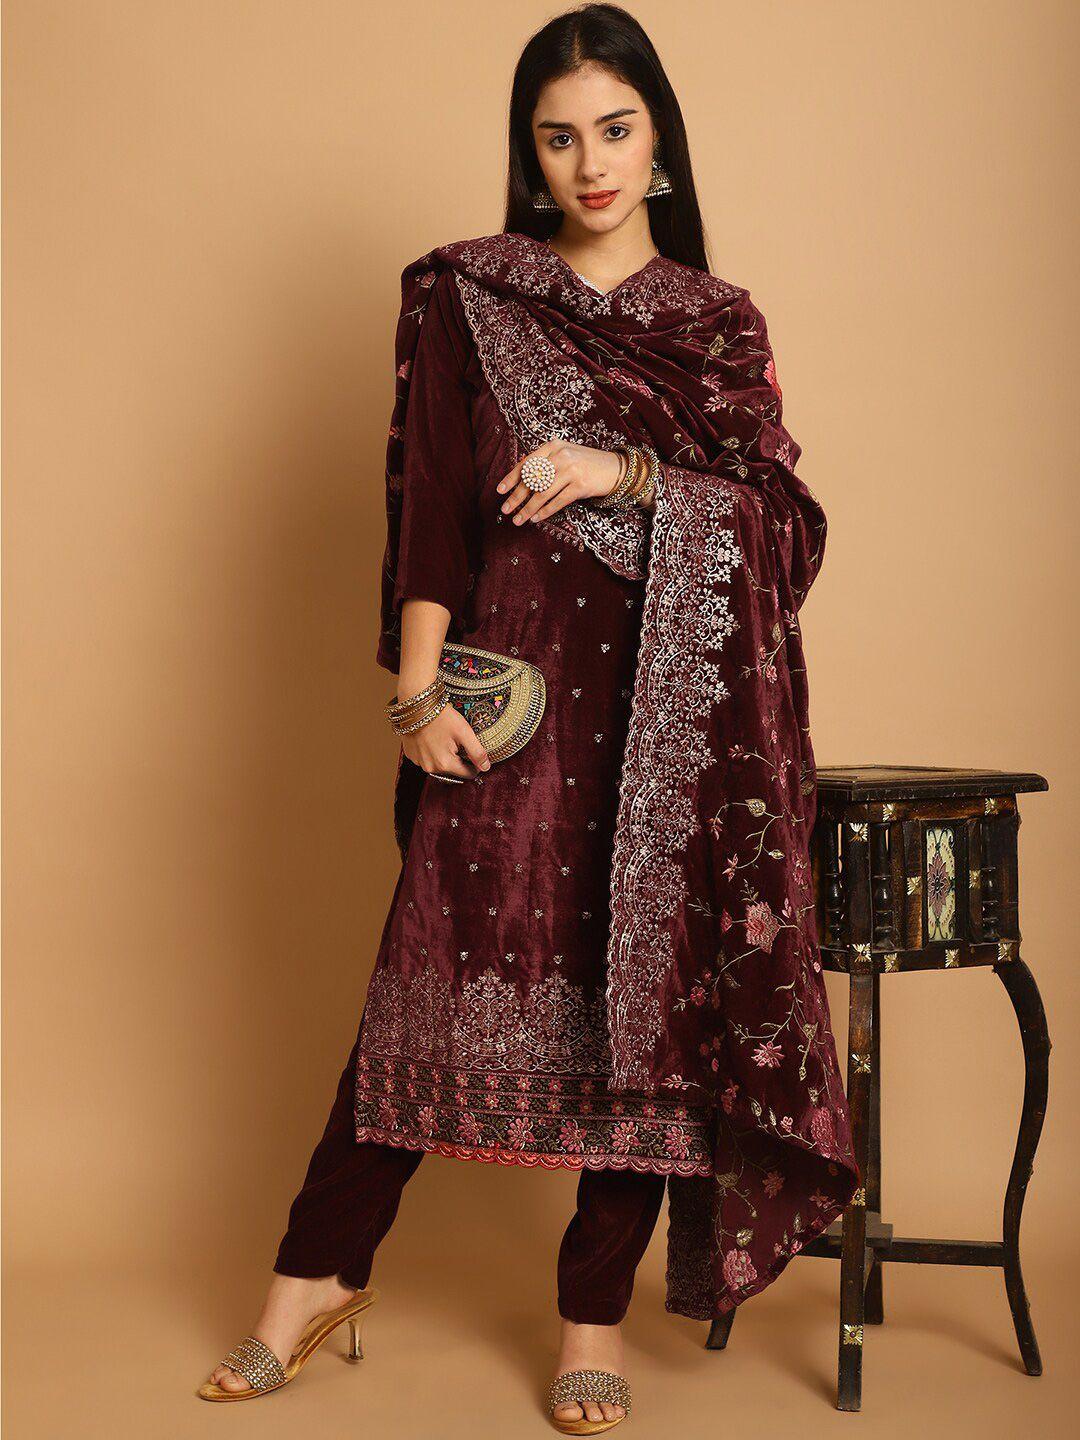 stylee lifestyle embroidered velvet unstitched dress material